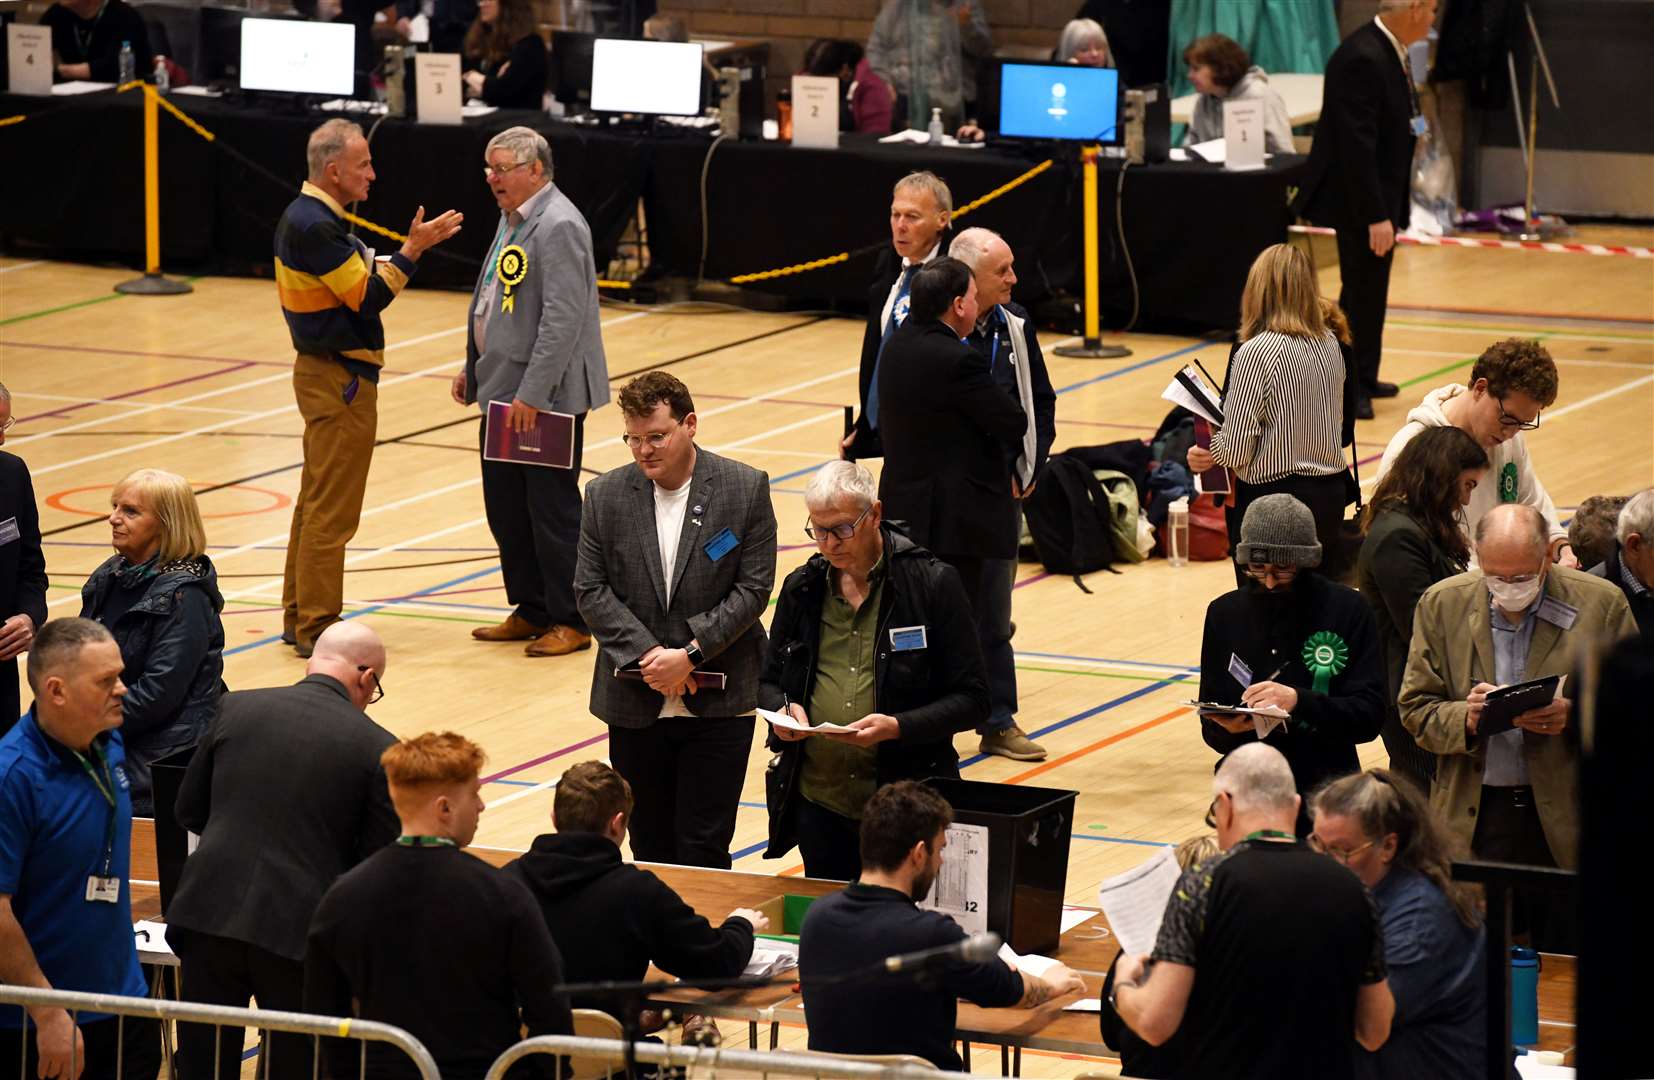 Election Count May 2022: The count floor from the balcony. Picture: James Mackenzie.